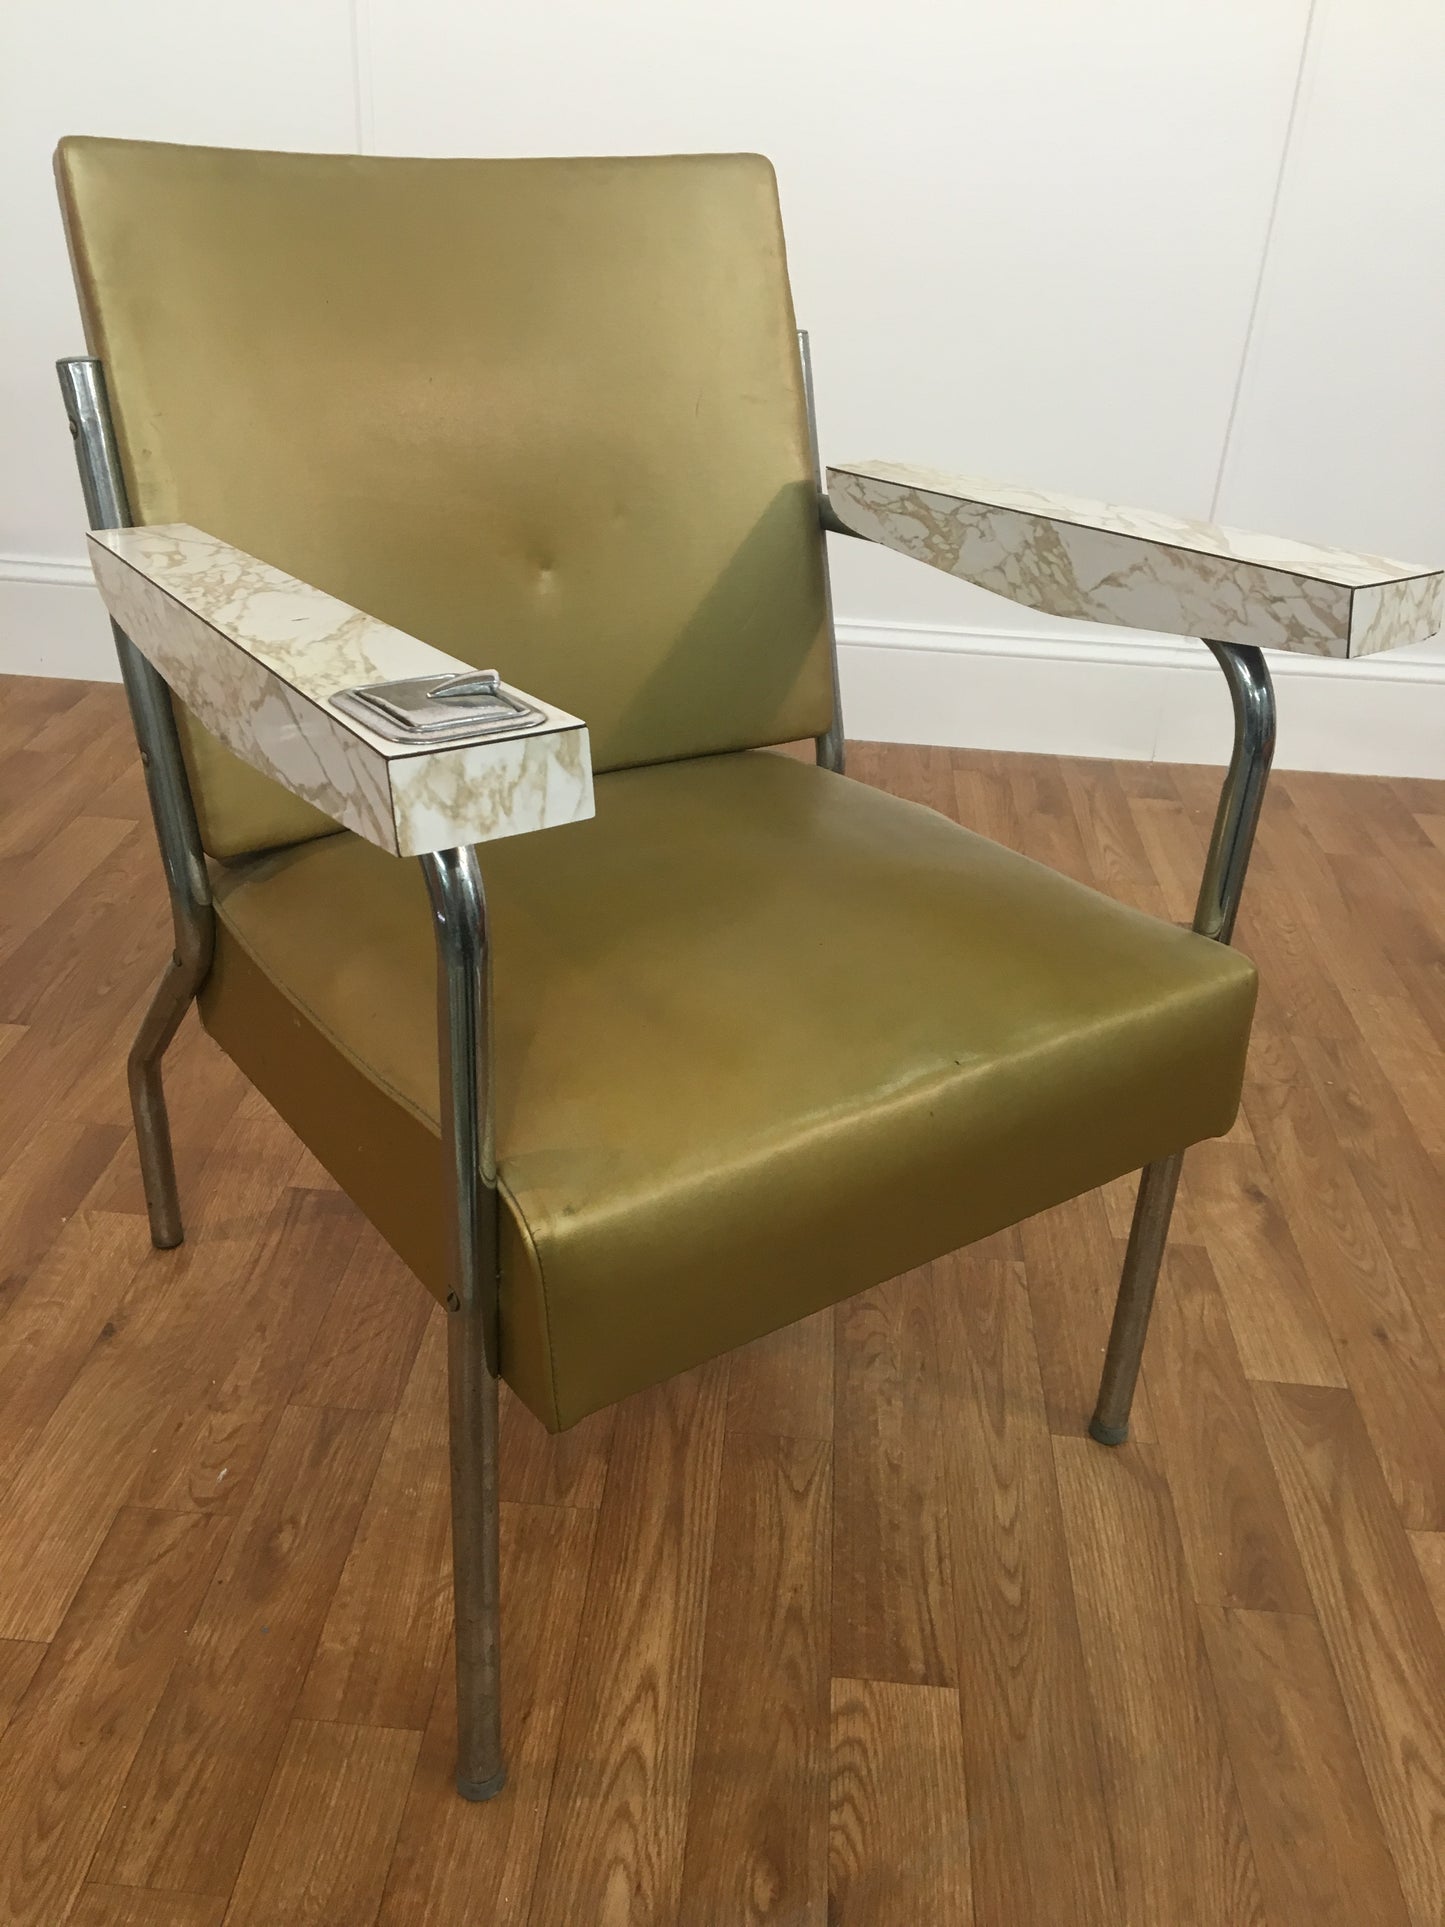 VINTAGE 1970s GOLD SALON CHAIR WITH ASH TRAY